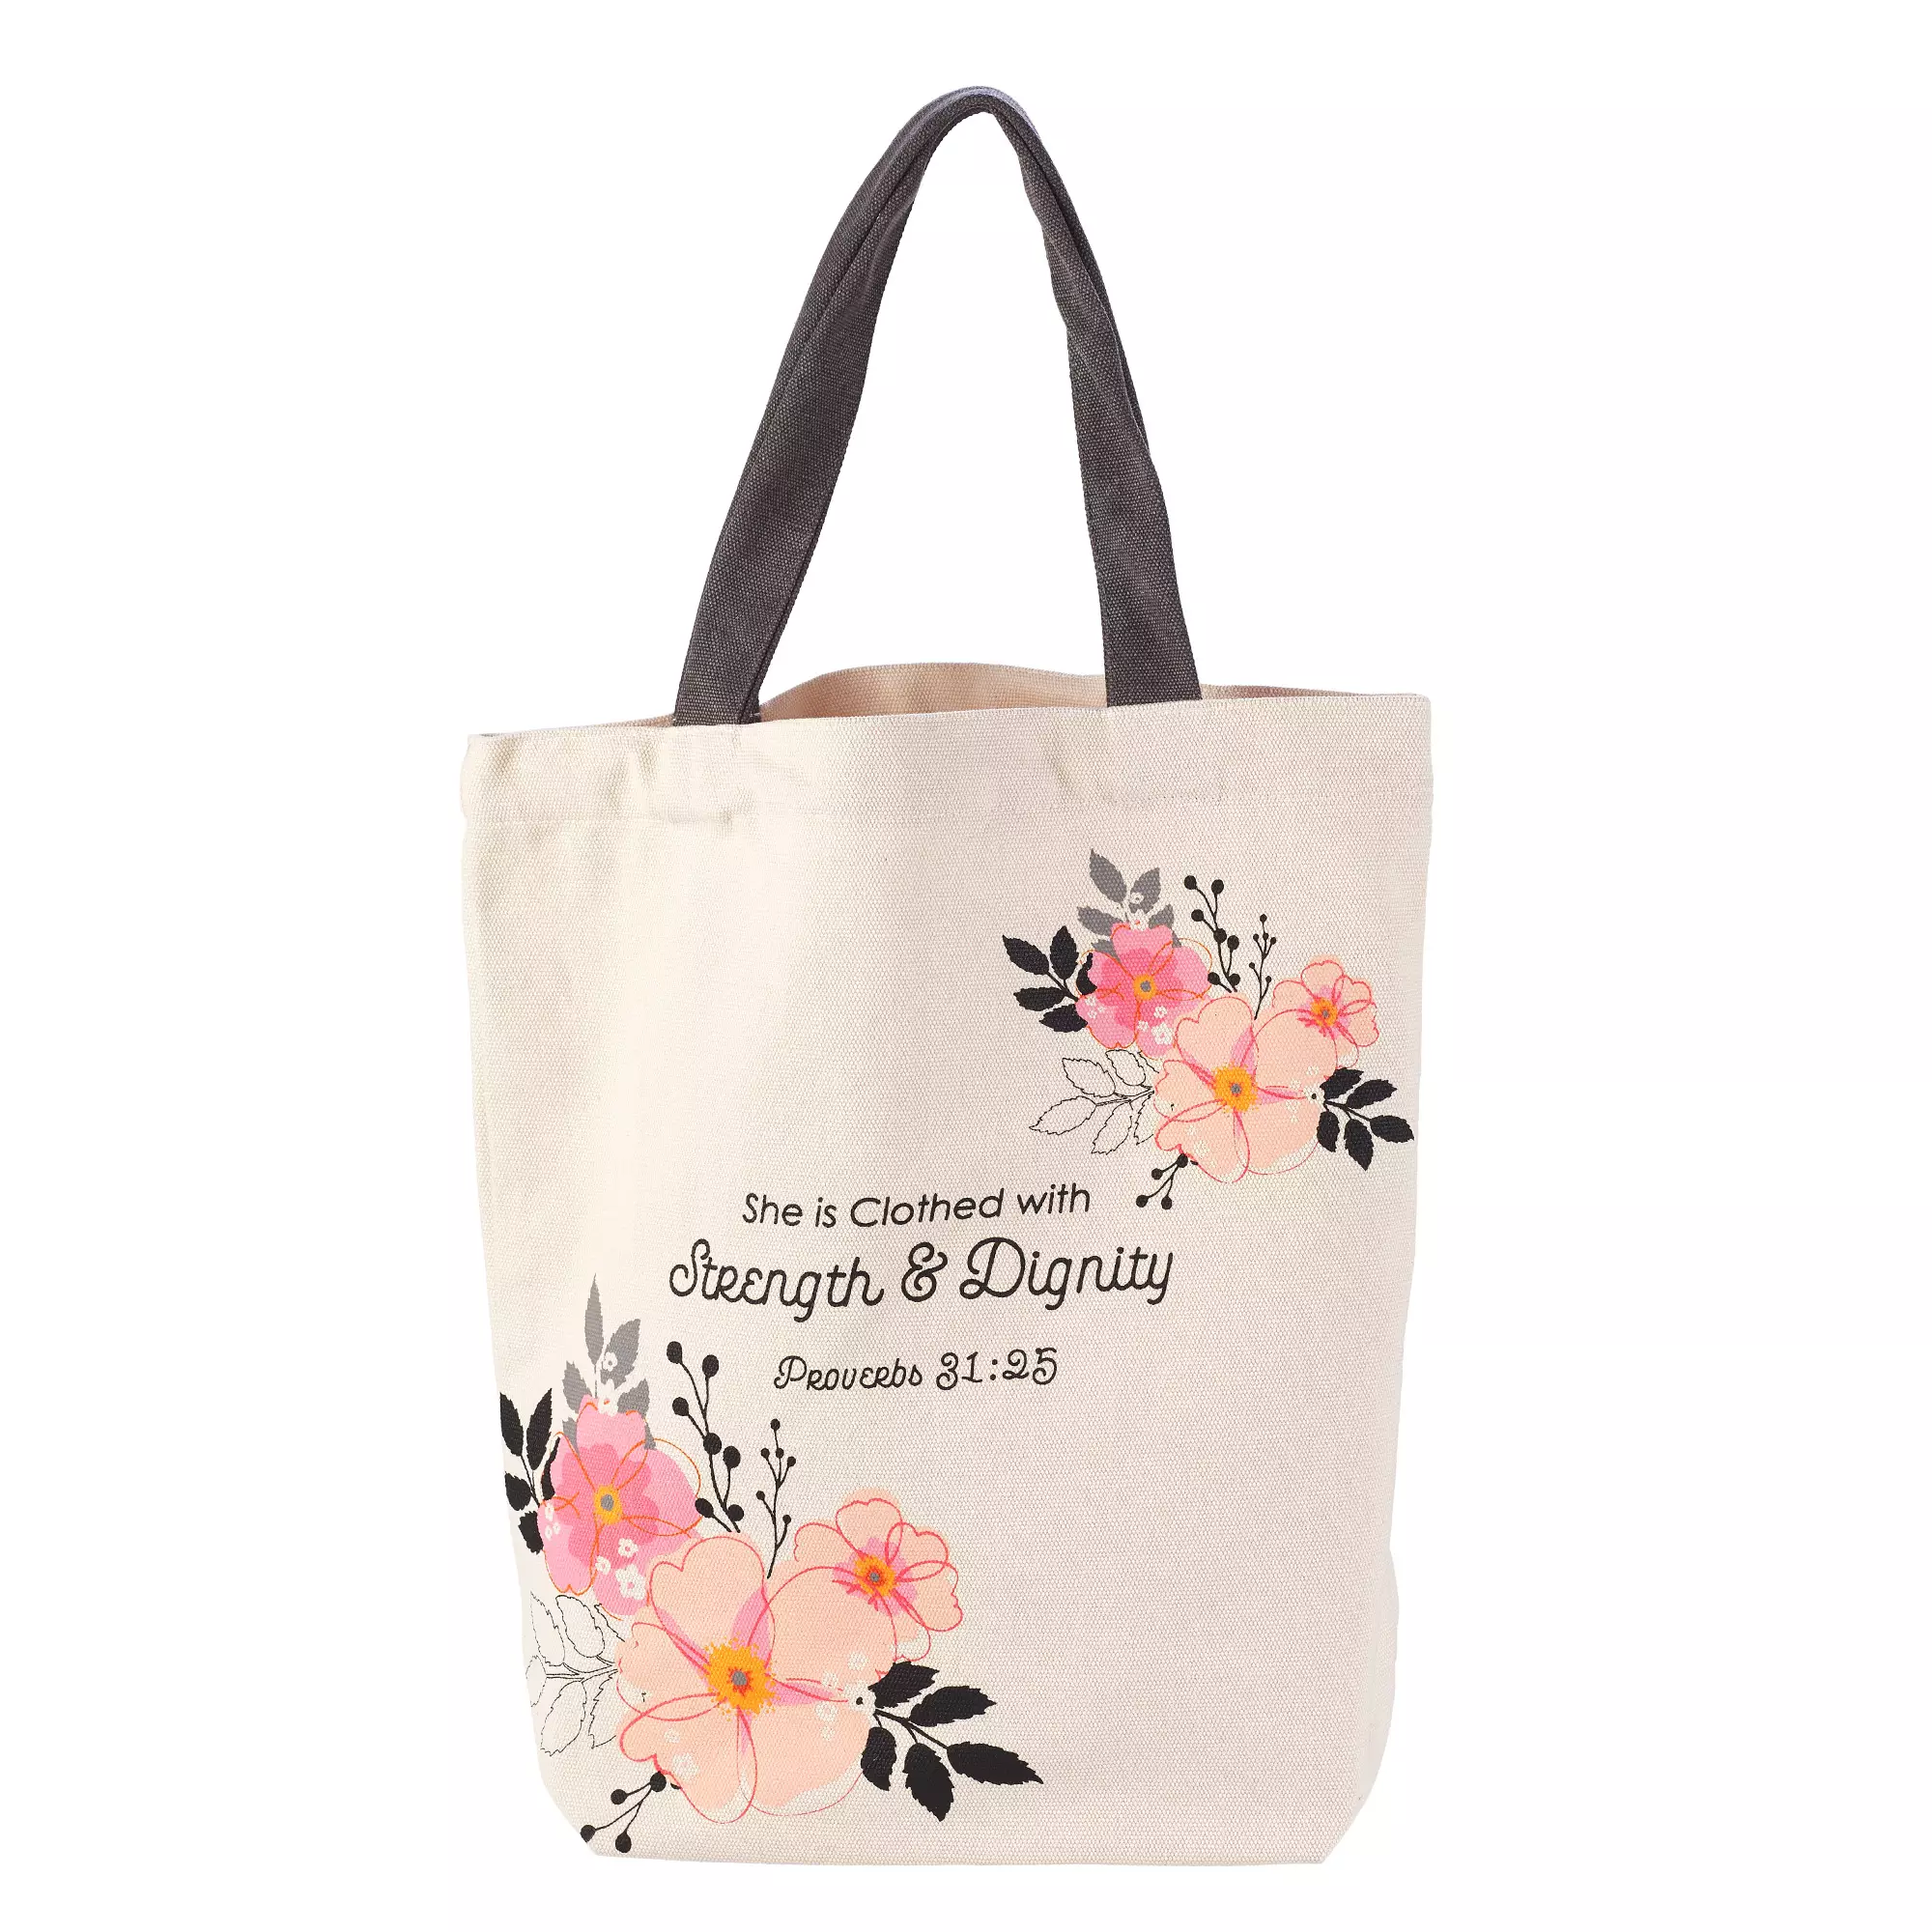 Strength & Dignity Fashion Canvas Tote Bag in White - Proverbs 31:25